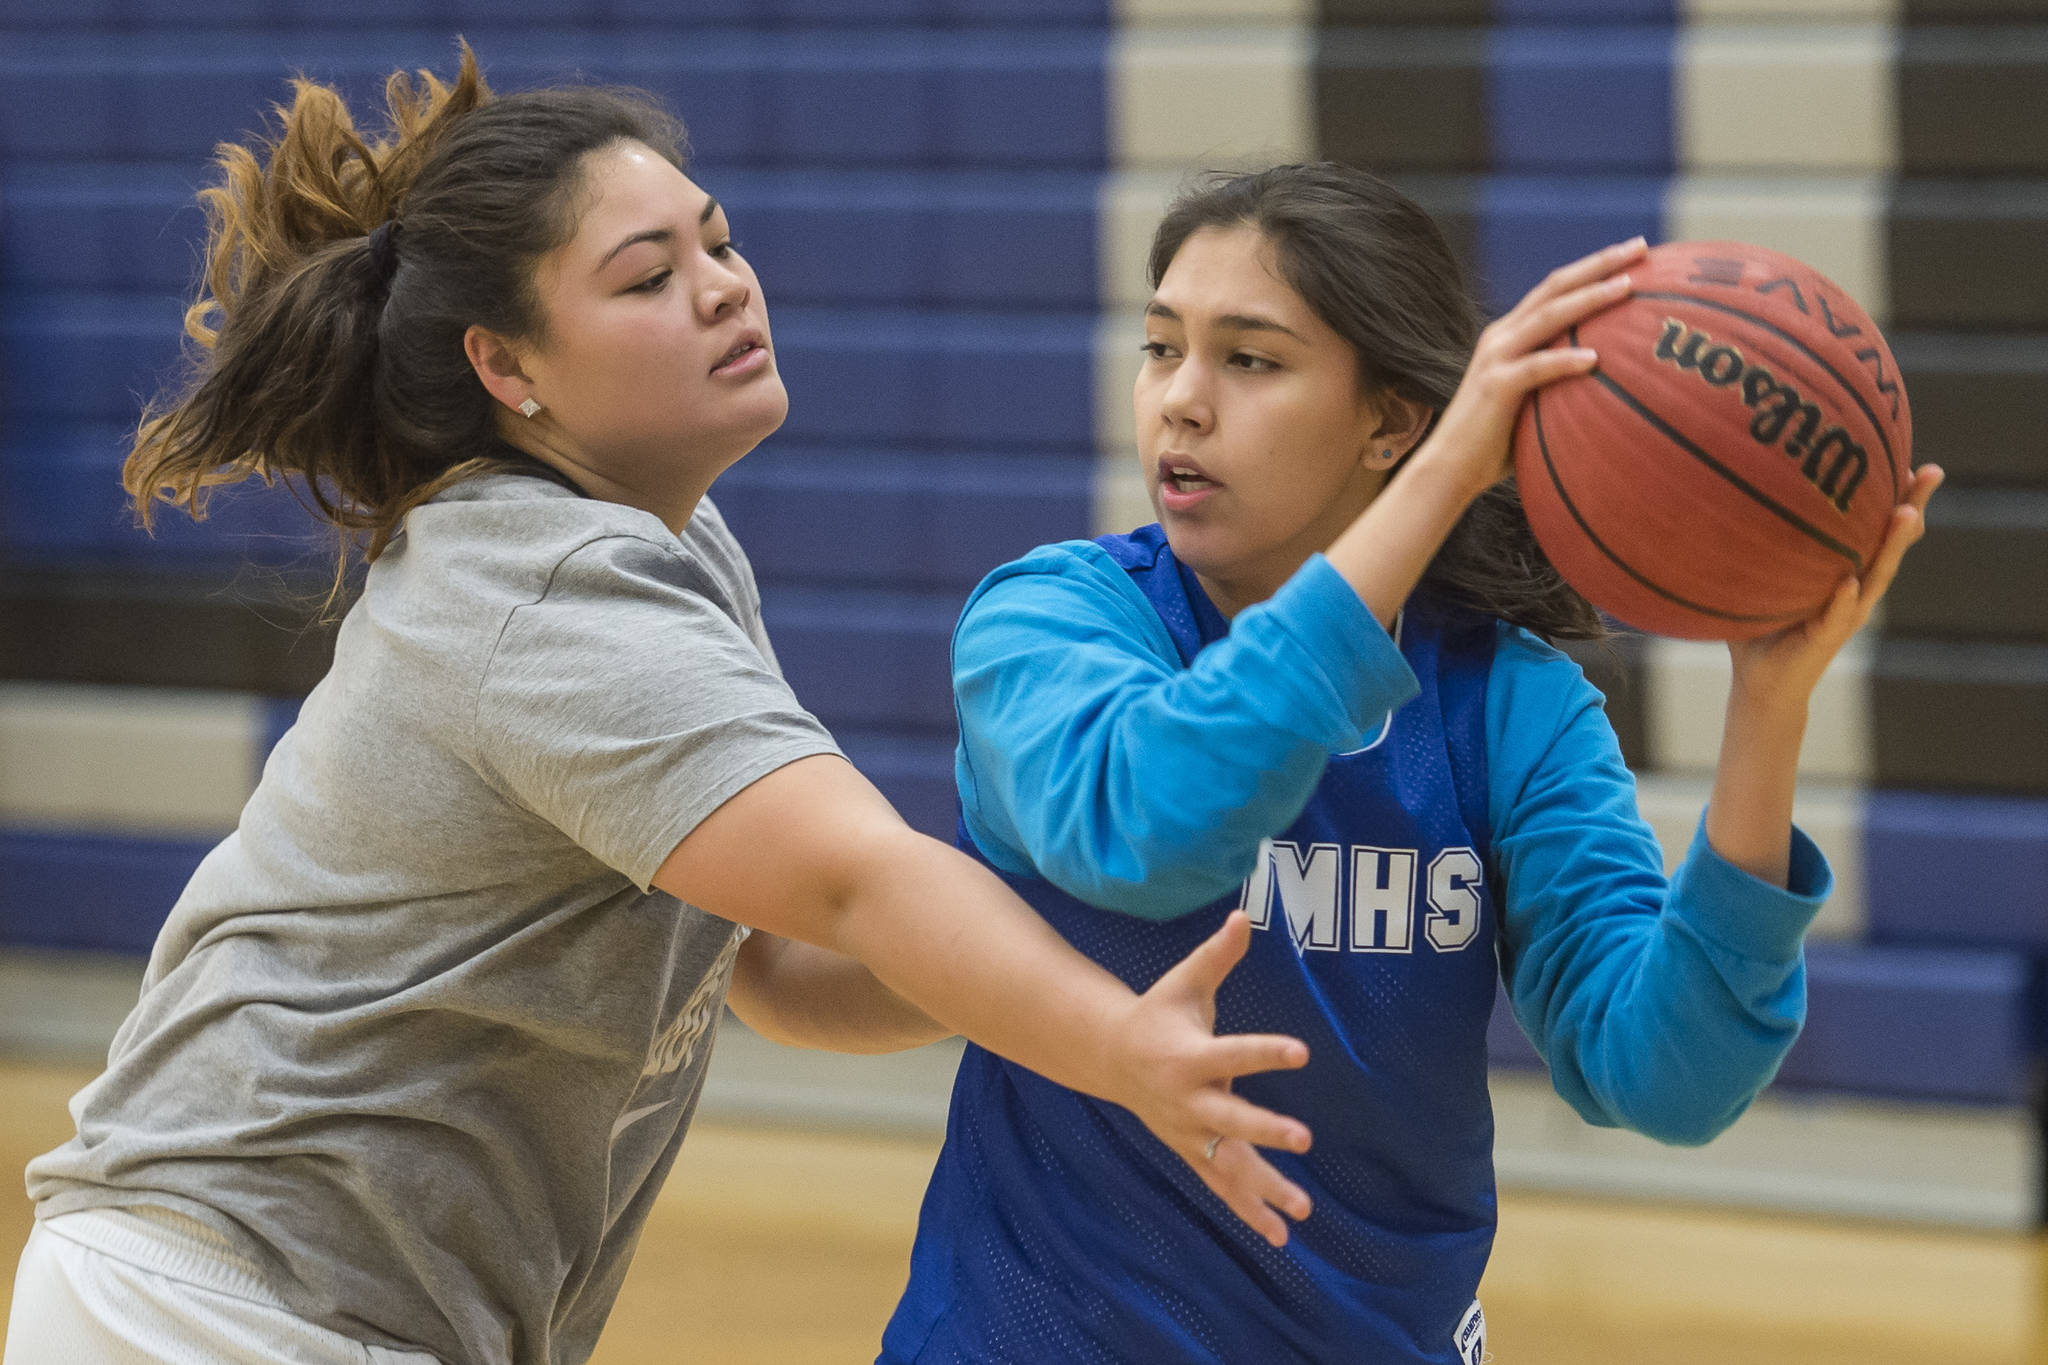 Nina Fenumiai, left, guards teammate Kira Frommherz during early morning girls basketball practice at Thunder Mountain High School on Tuesday, Dec. 11, 2018. (Michael Penn | Juneau Empire)